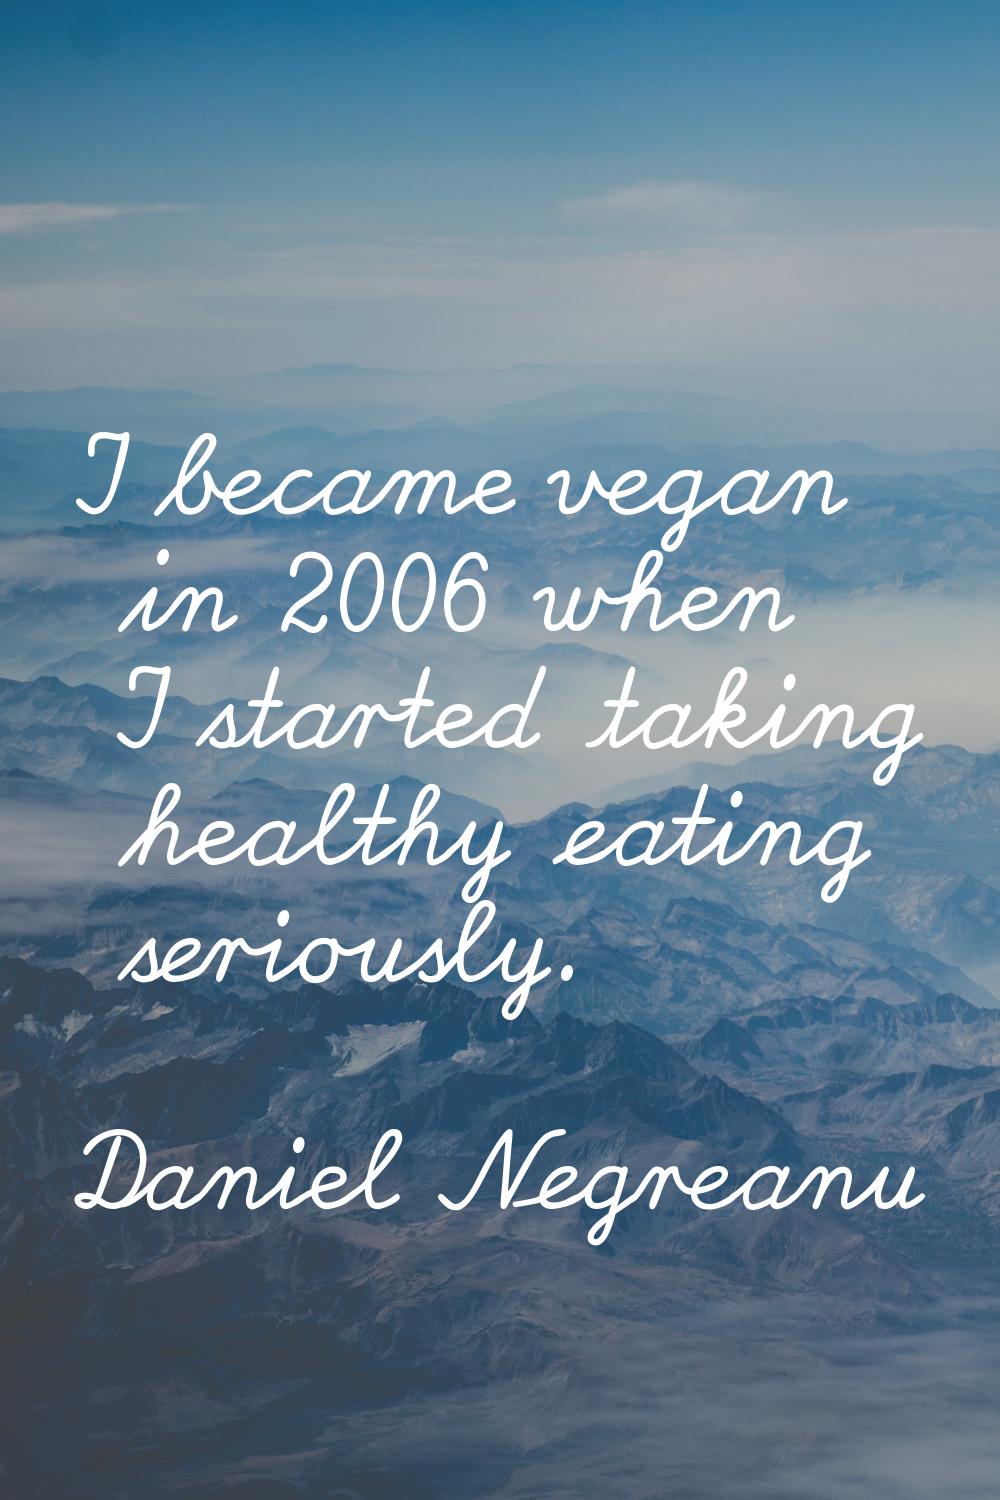 I became vegan in 2006 when I started taking healthy eating seriously.